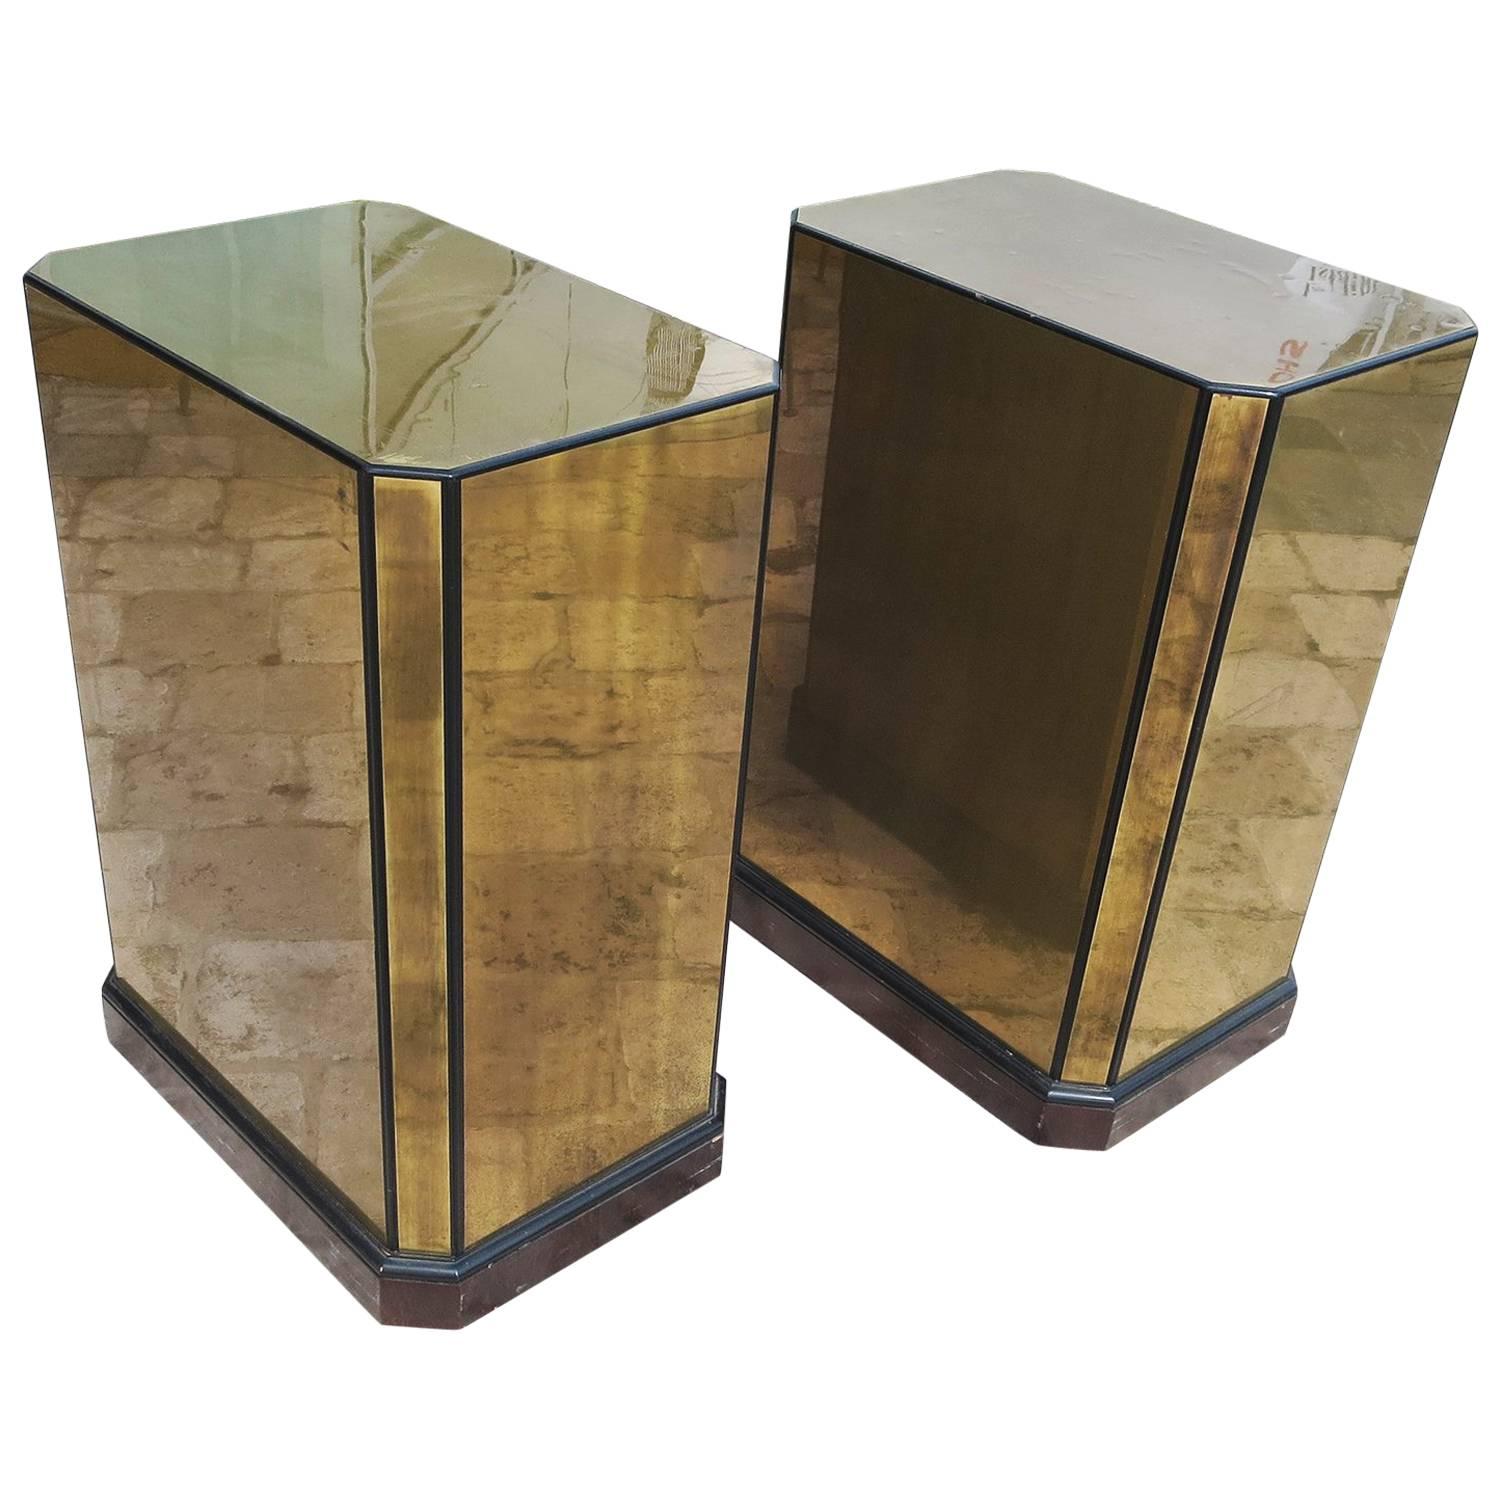 Drexel Brass and Wood Pedestals or Dining Table Bases